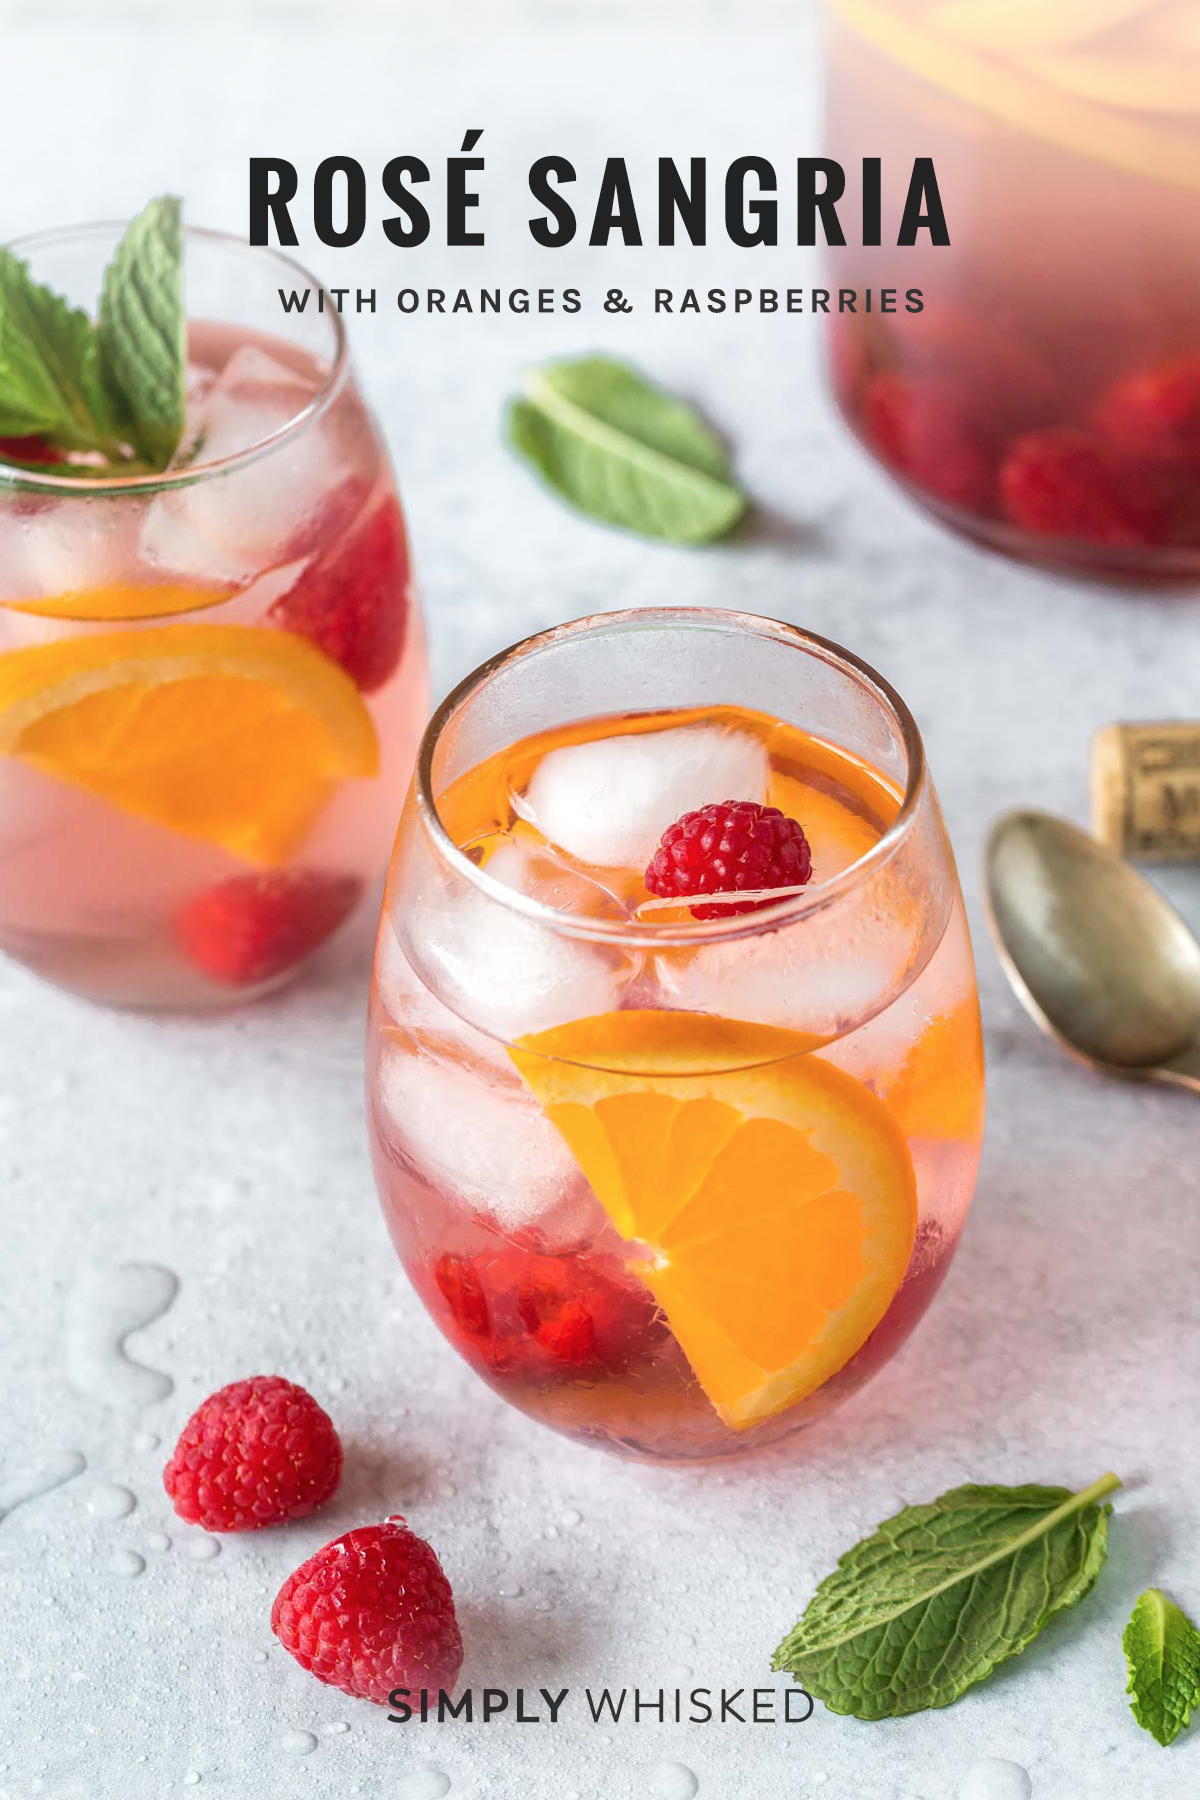 rose sangria recipe garnished with orange slices, raspberries and mint leaves